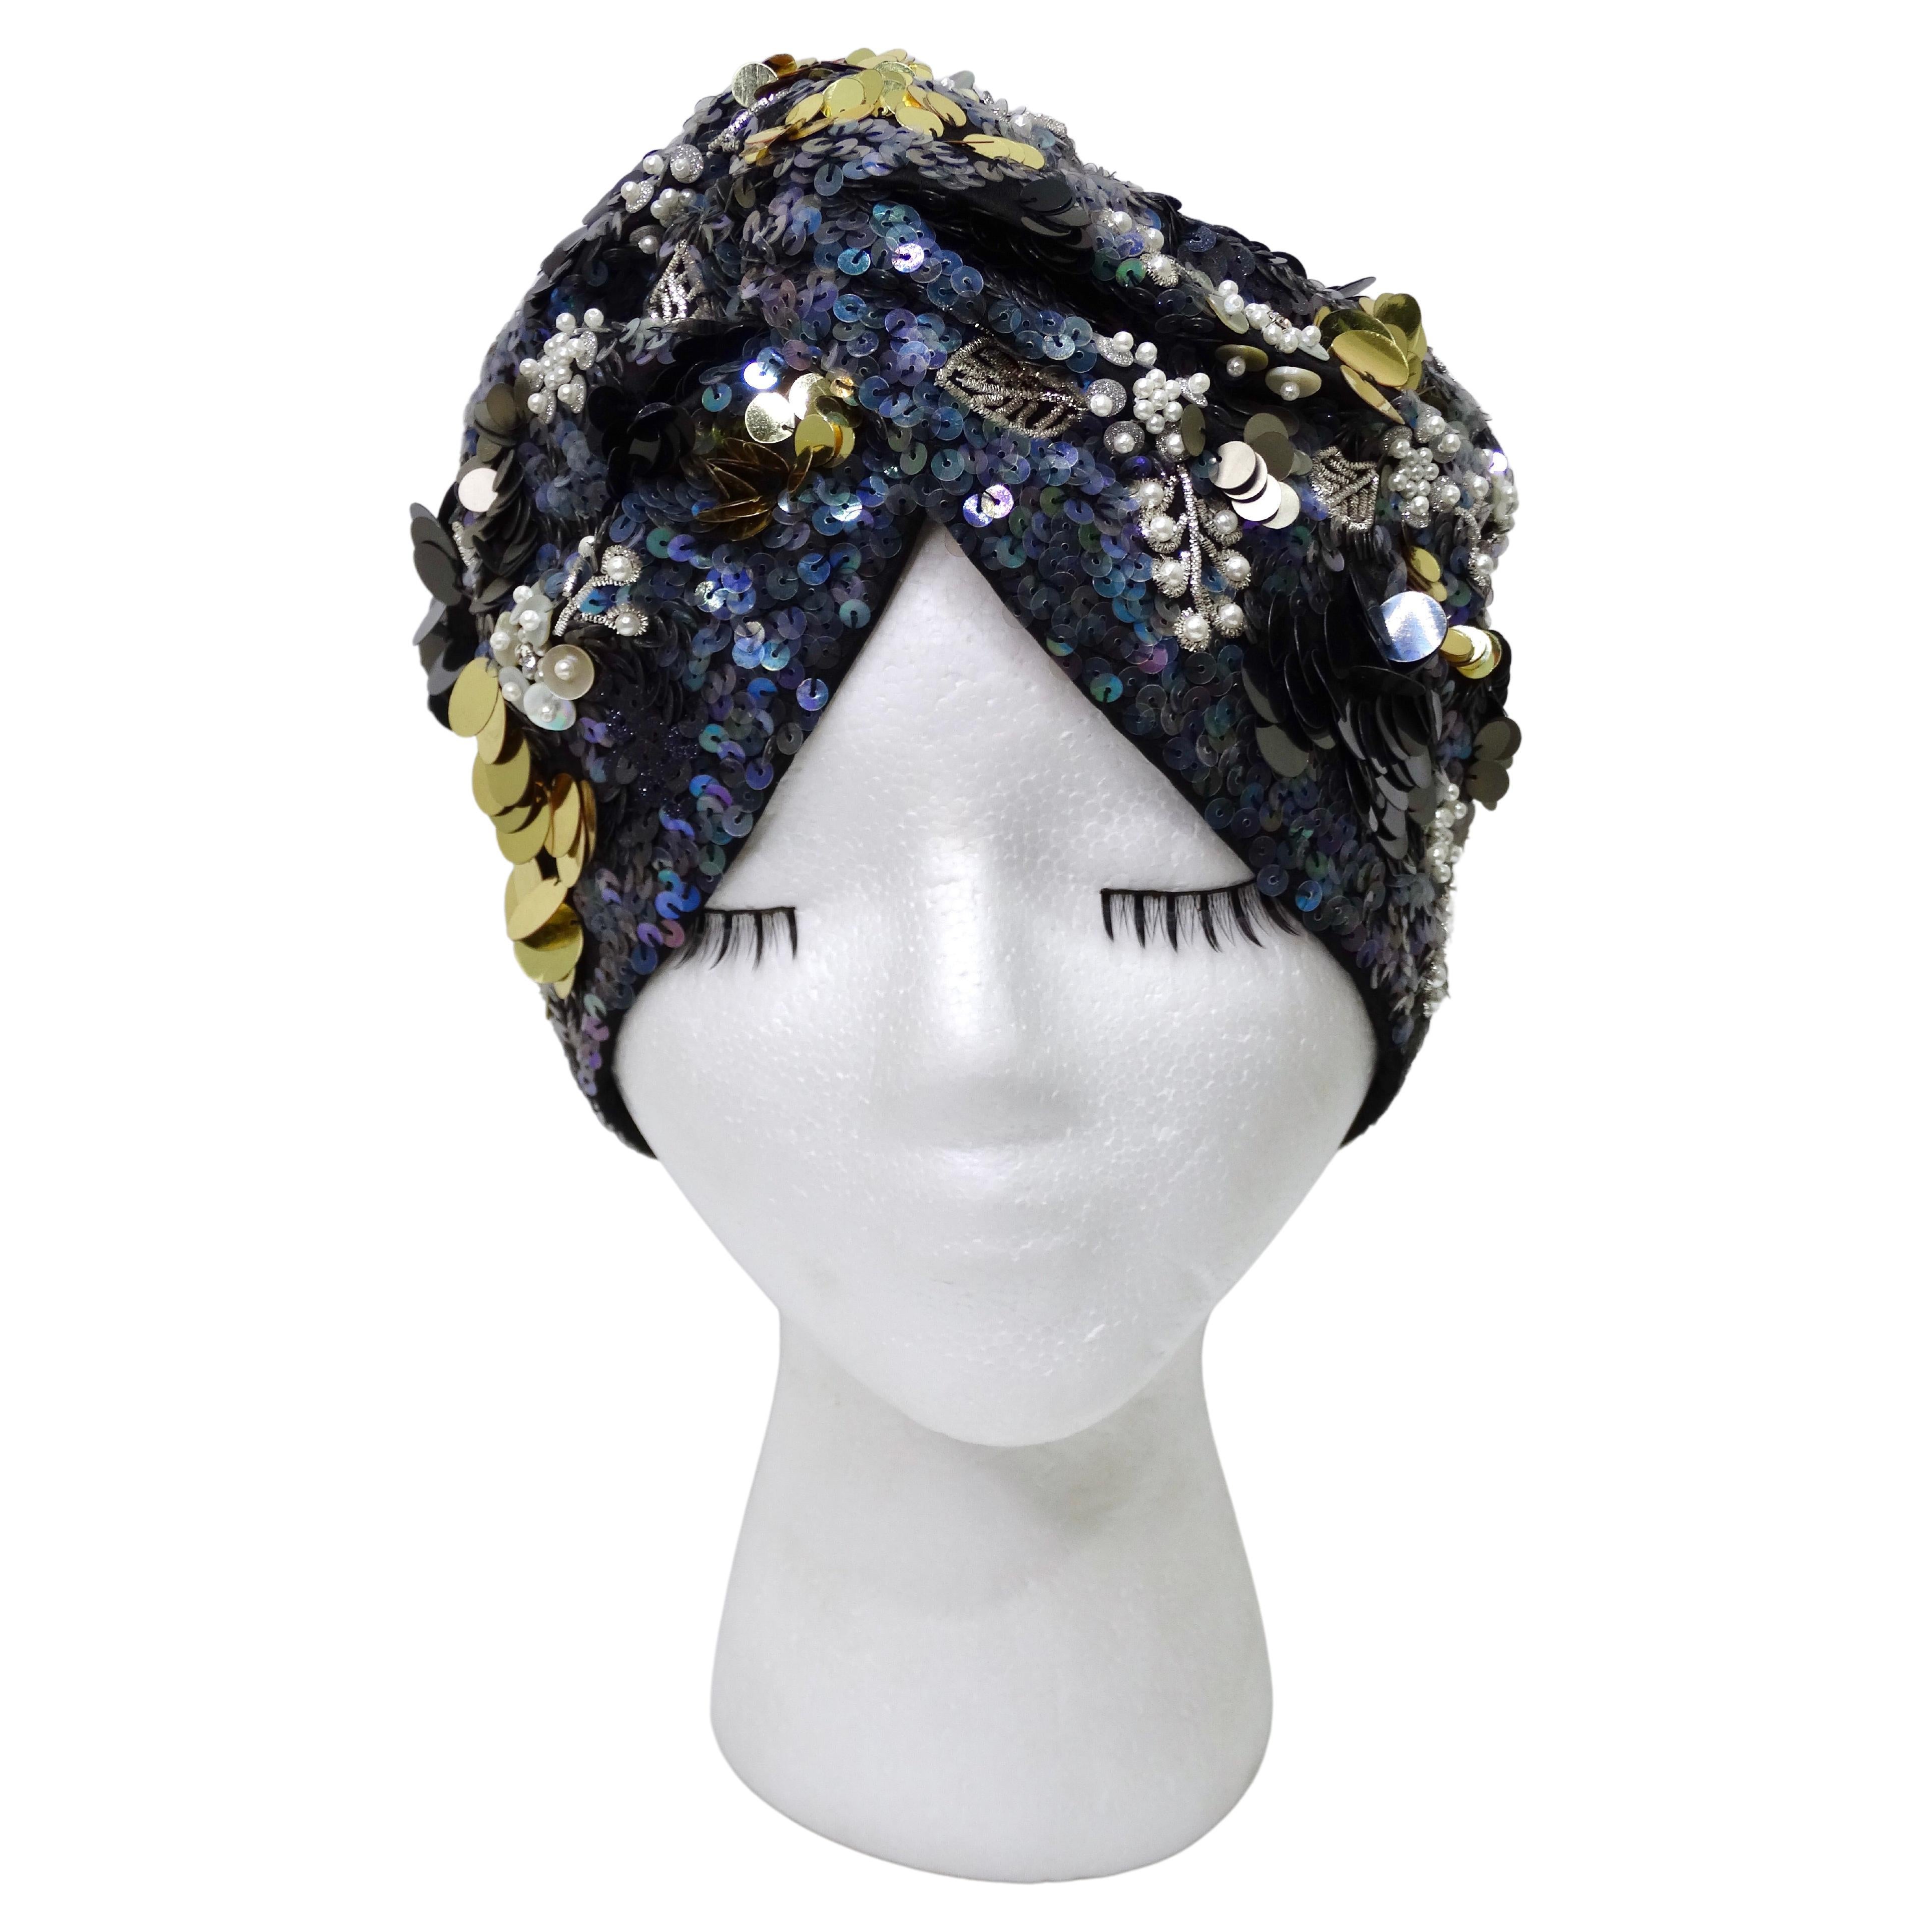 This is a beautiful and highly detailed turban by Maryjane Claverol featuring complete embellishing with large and small sequins and beading in soft colors like blue, grey, gold, and white. This will add interest and a statement to any outfit!